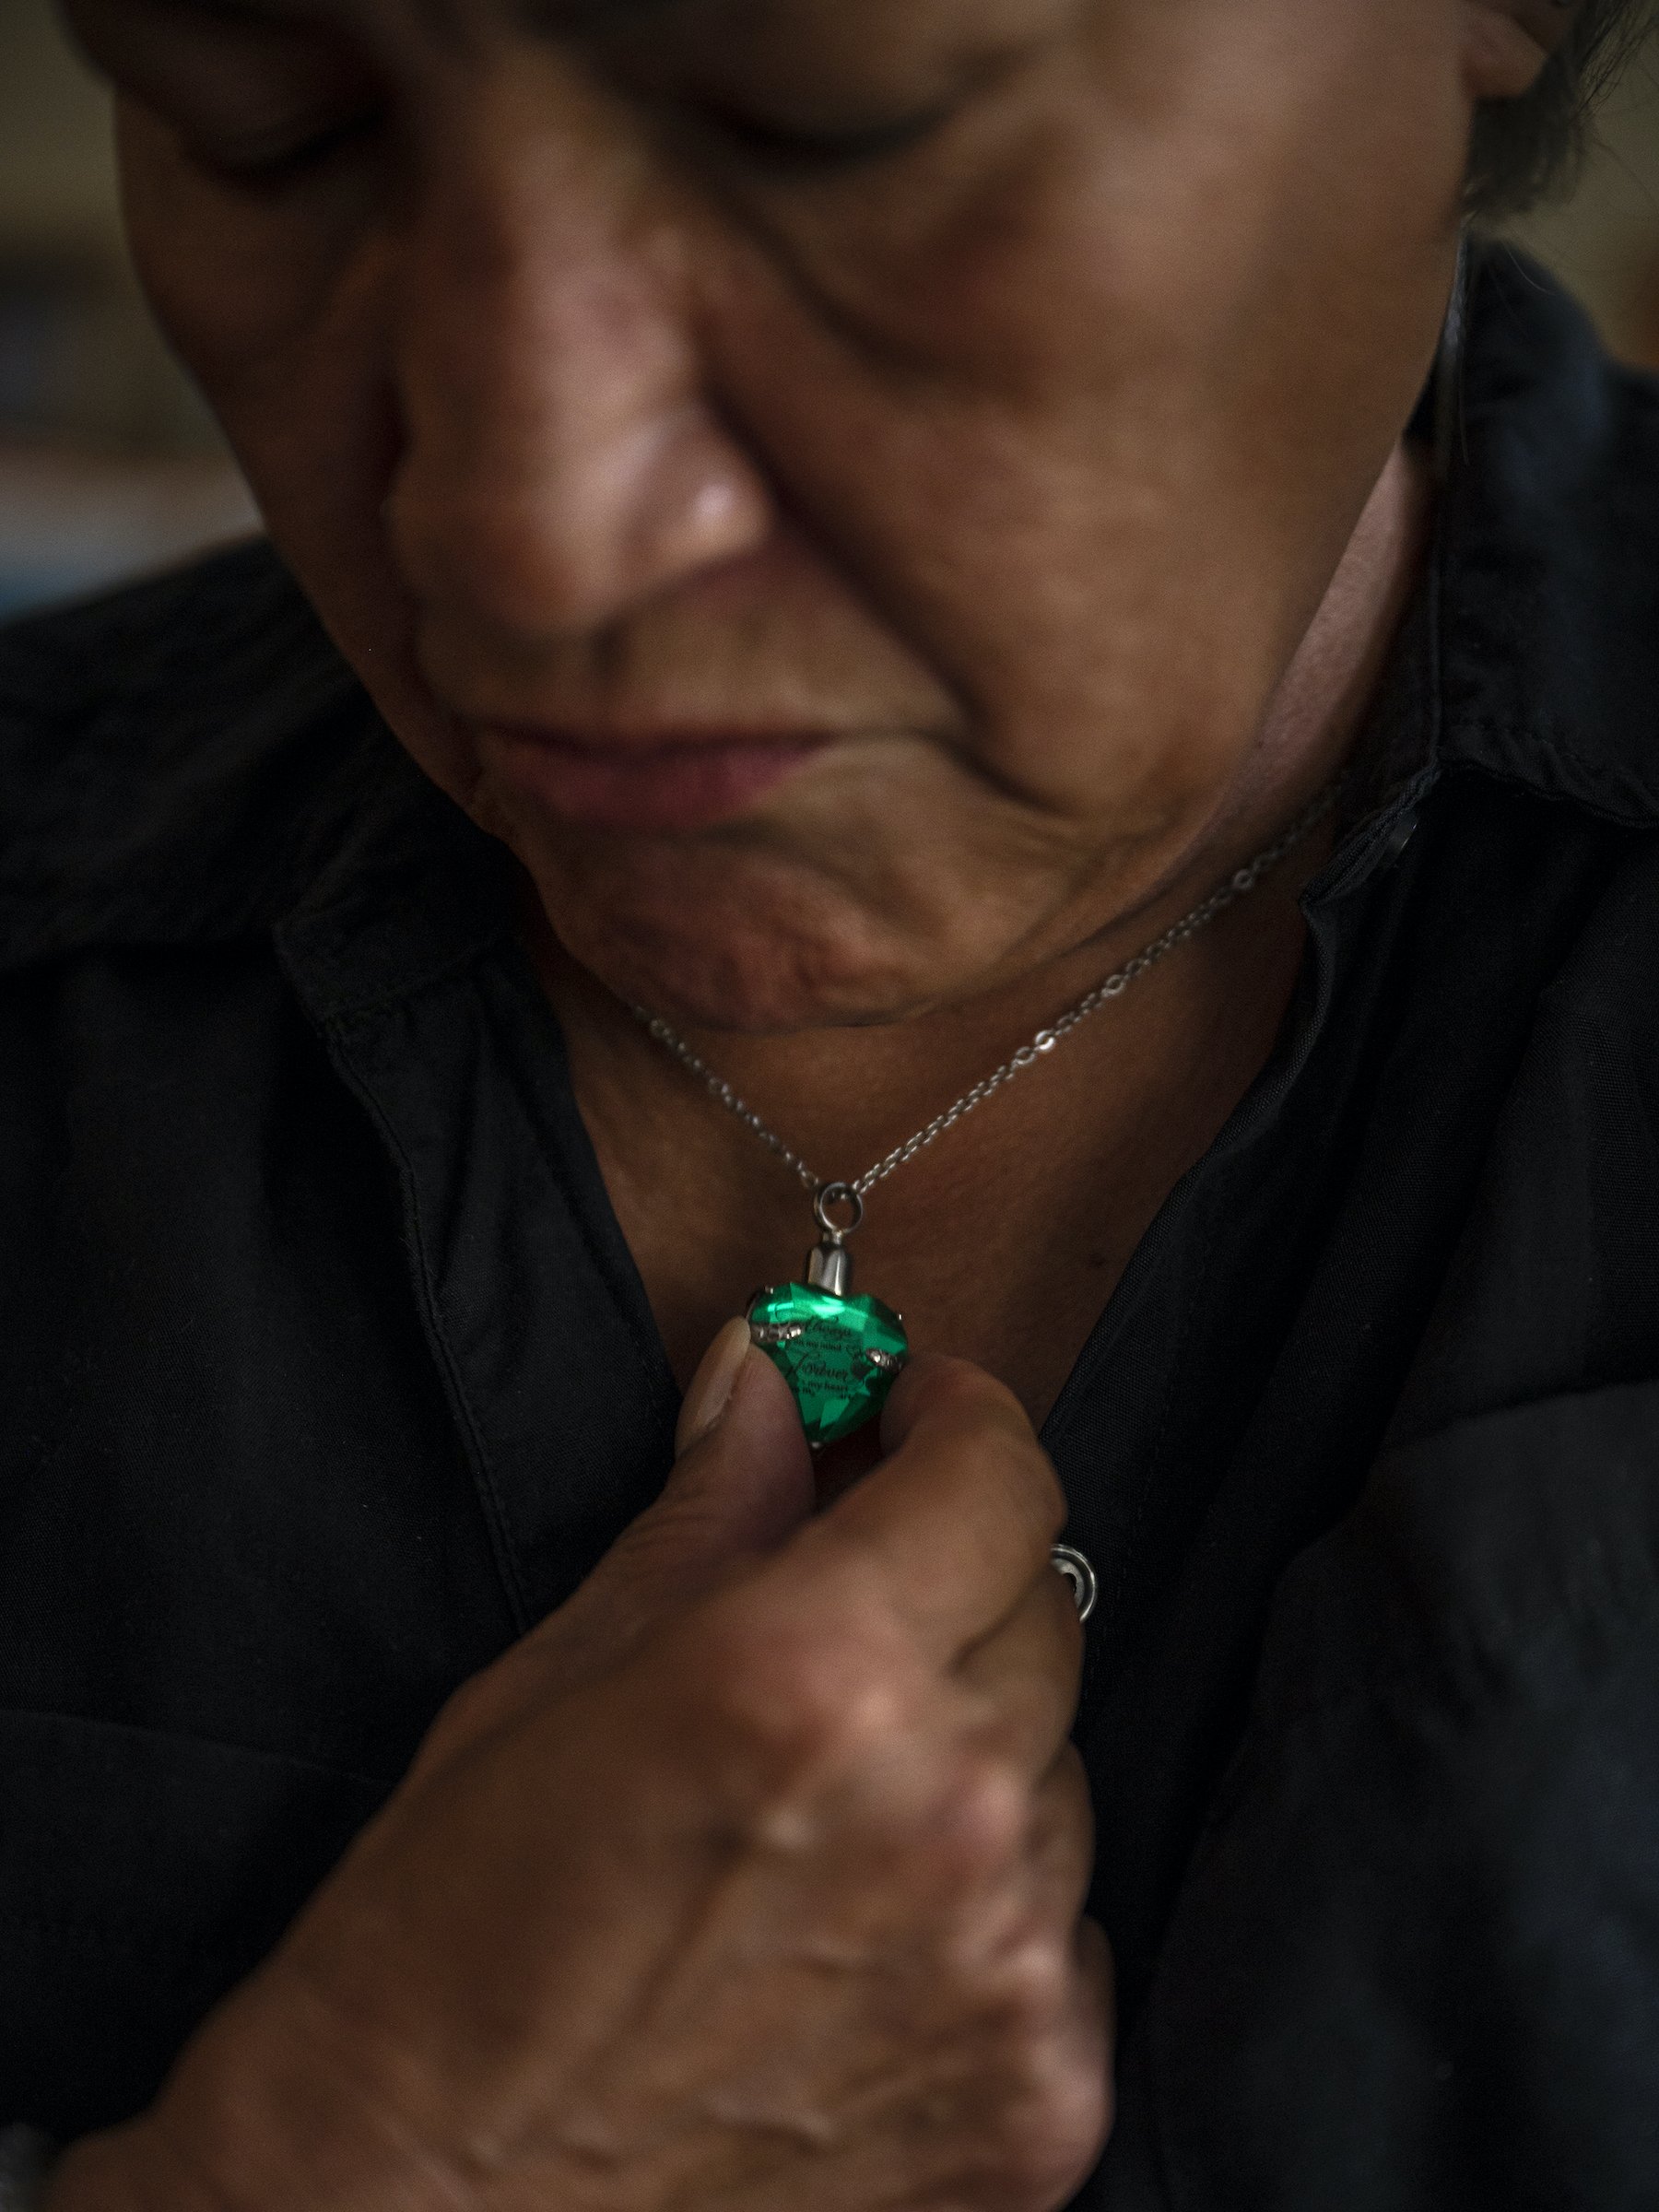  Rosario-Megibow’s pendant contains a small amount of Michael David Lopez’ ashes, photographed on Friday, July 29, 2022. Photographed for THE CITY with reporting by Reuven Blau. © Hiram Alejandro Durán 